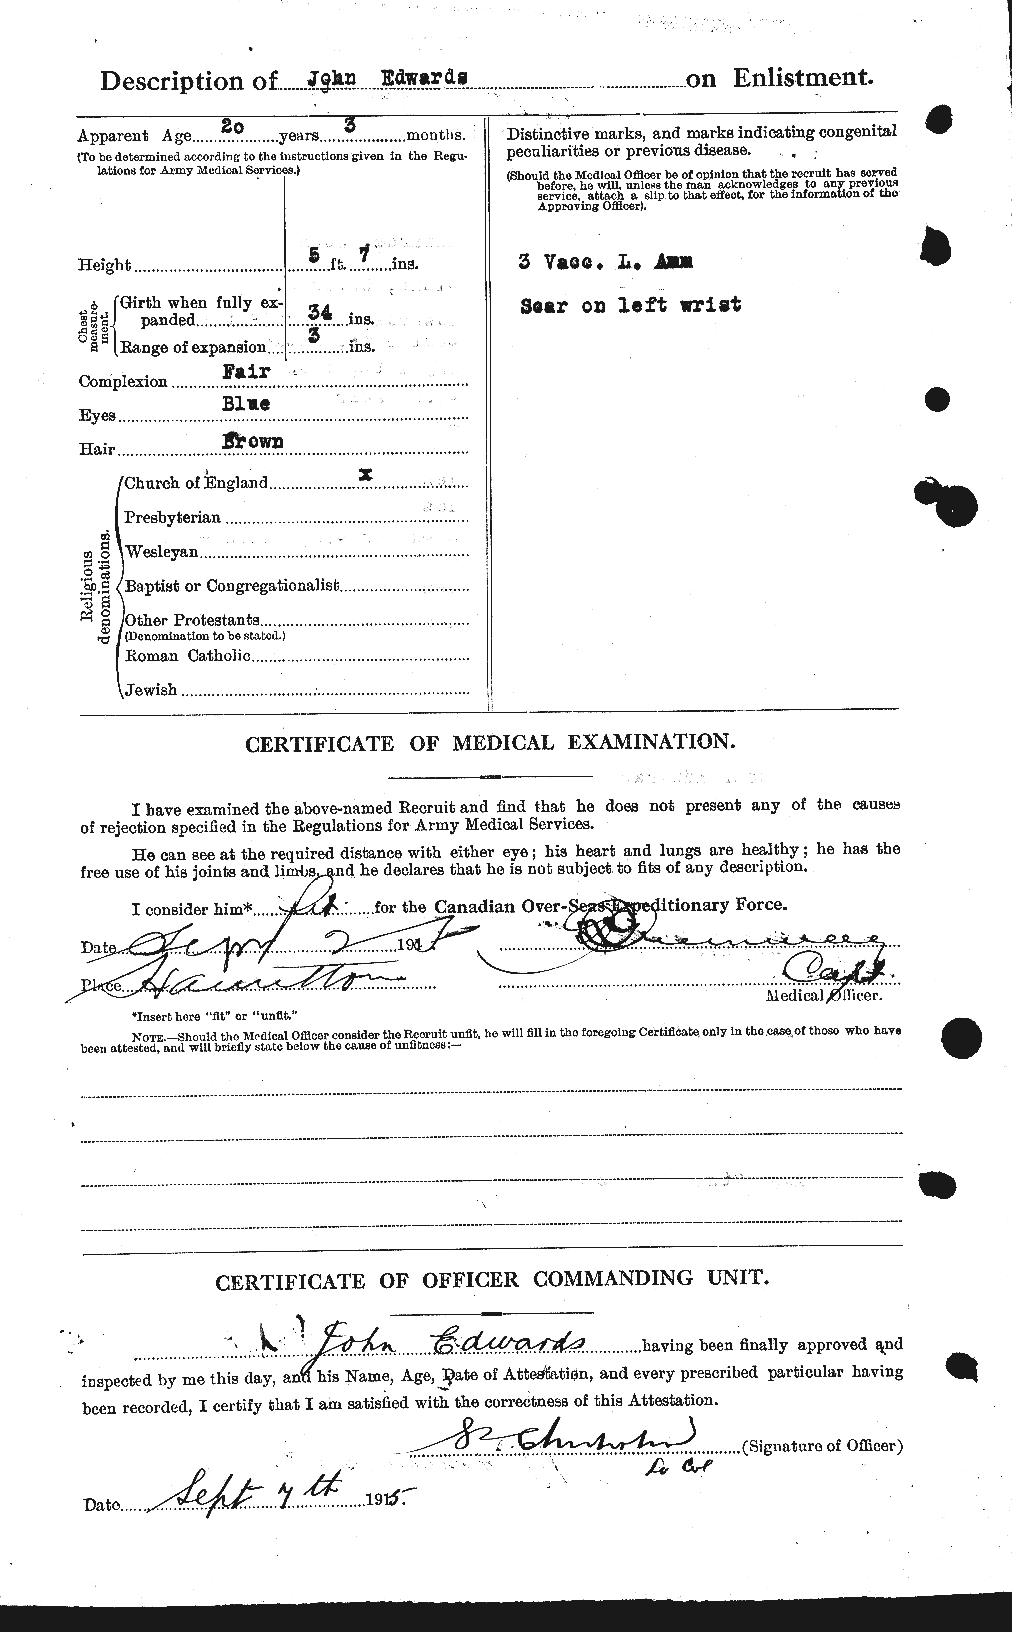 Personnel Records of the First World War - CEF 309837b